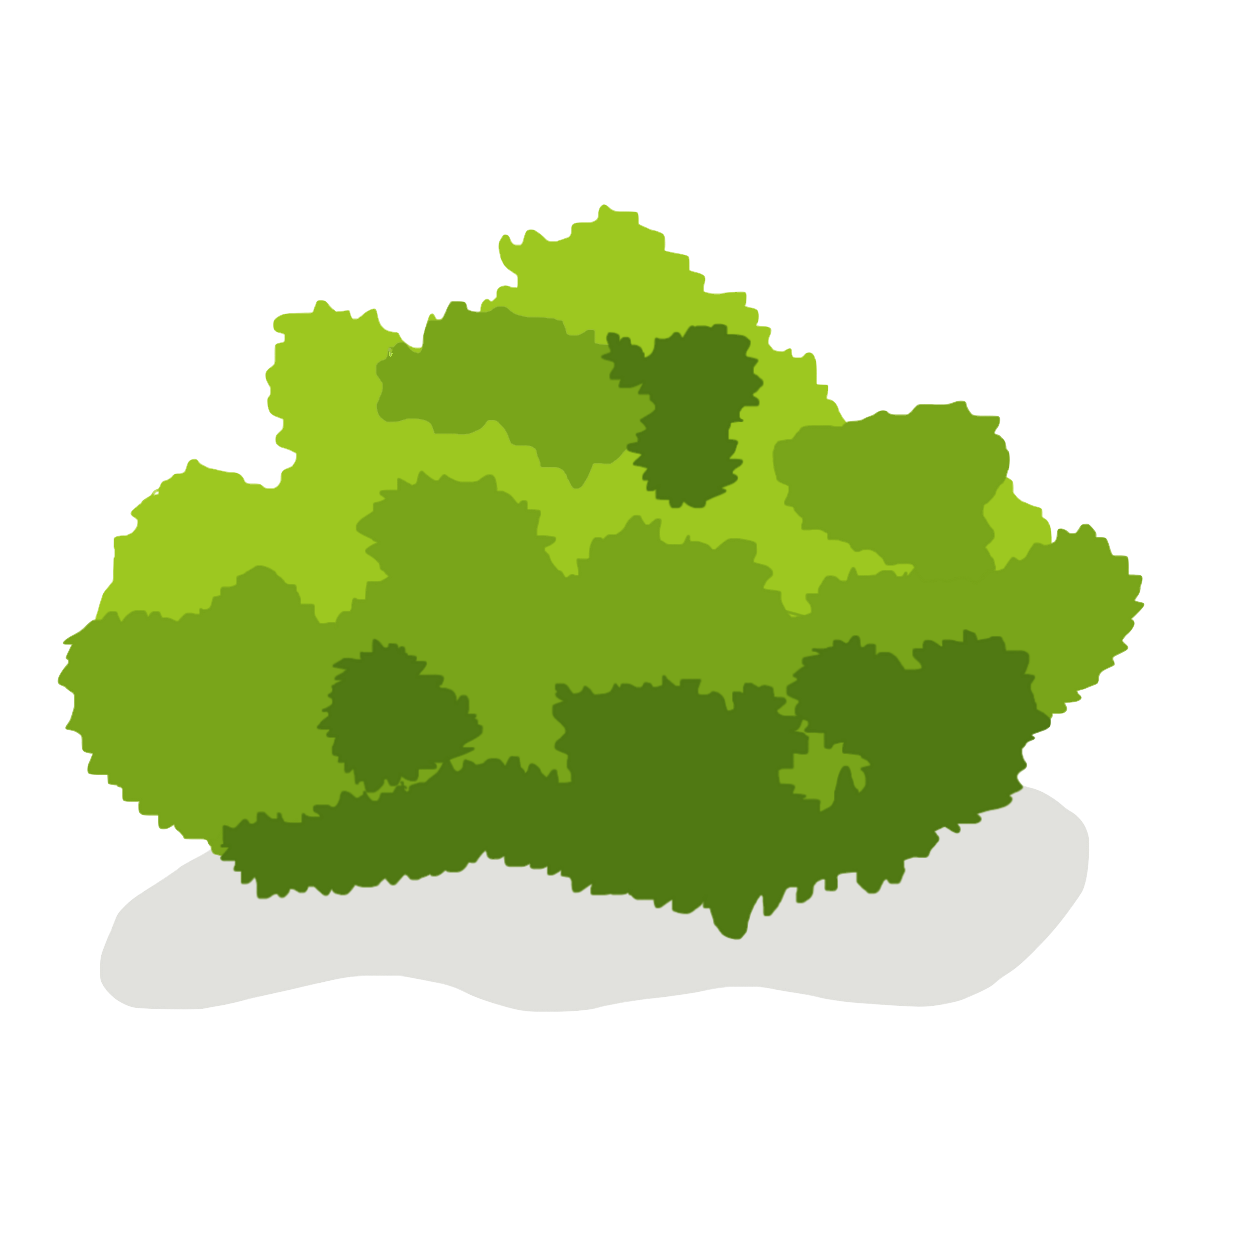 Bushes clipart - Clipground